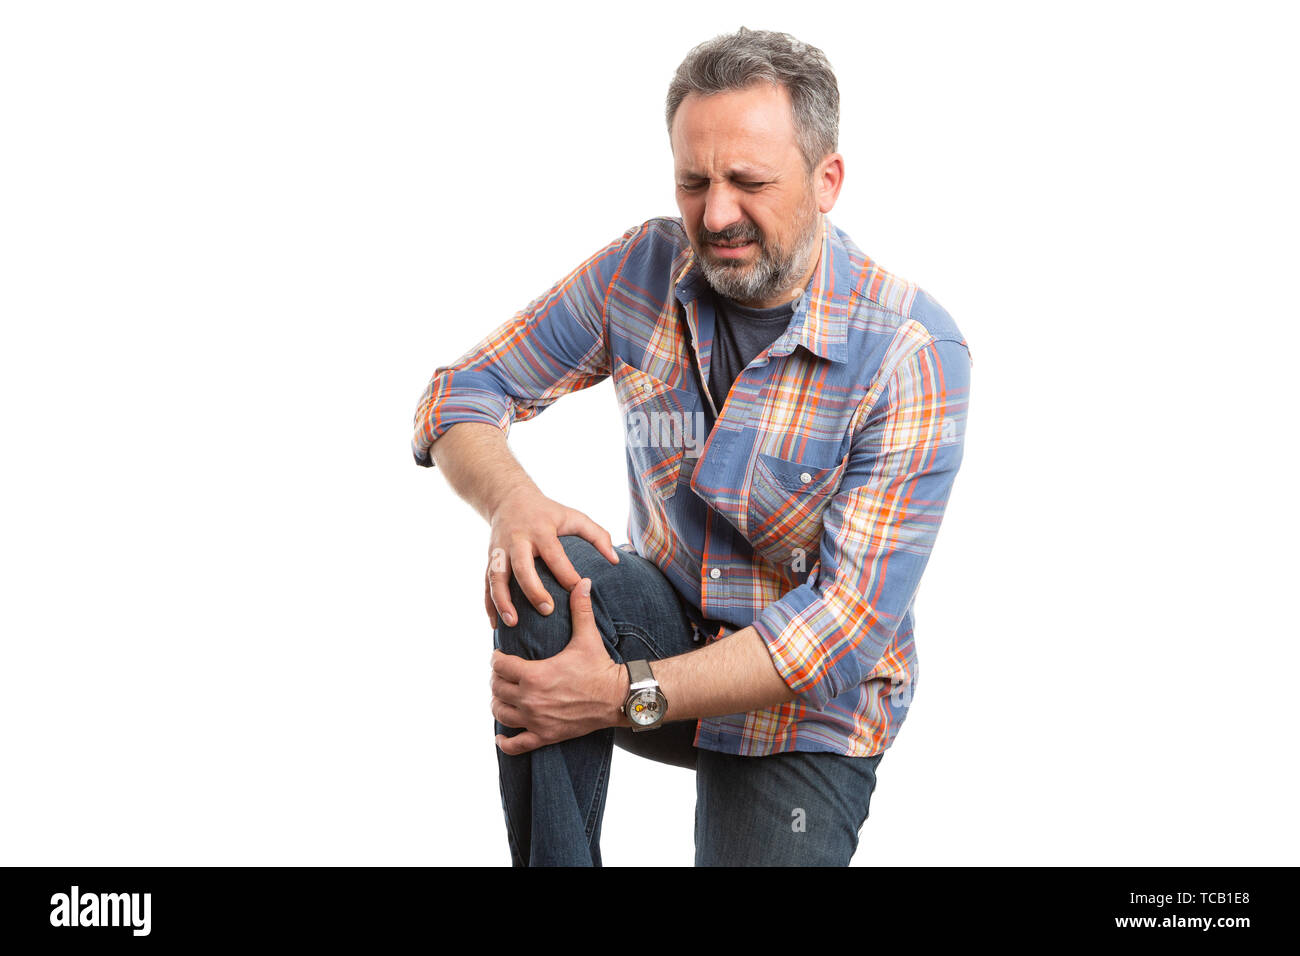 Man making in pain expression holding painful knee as physical effort concept isolated on white studio background Stock Photo